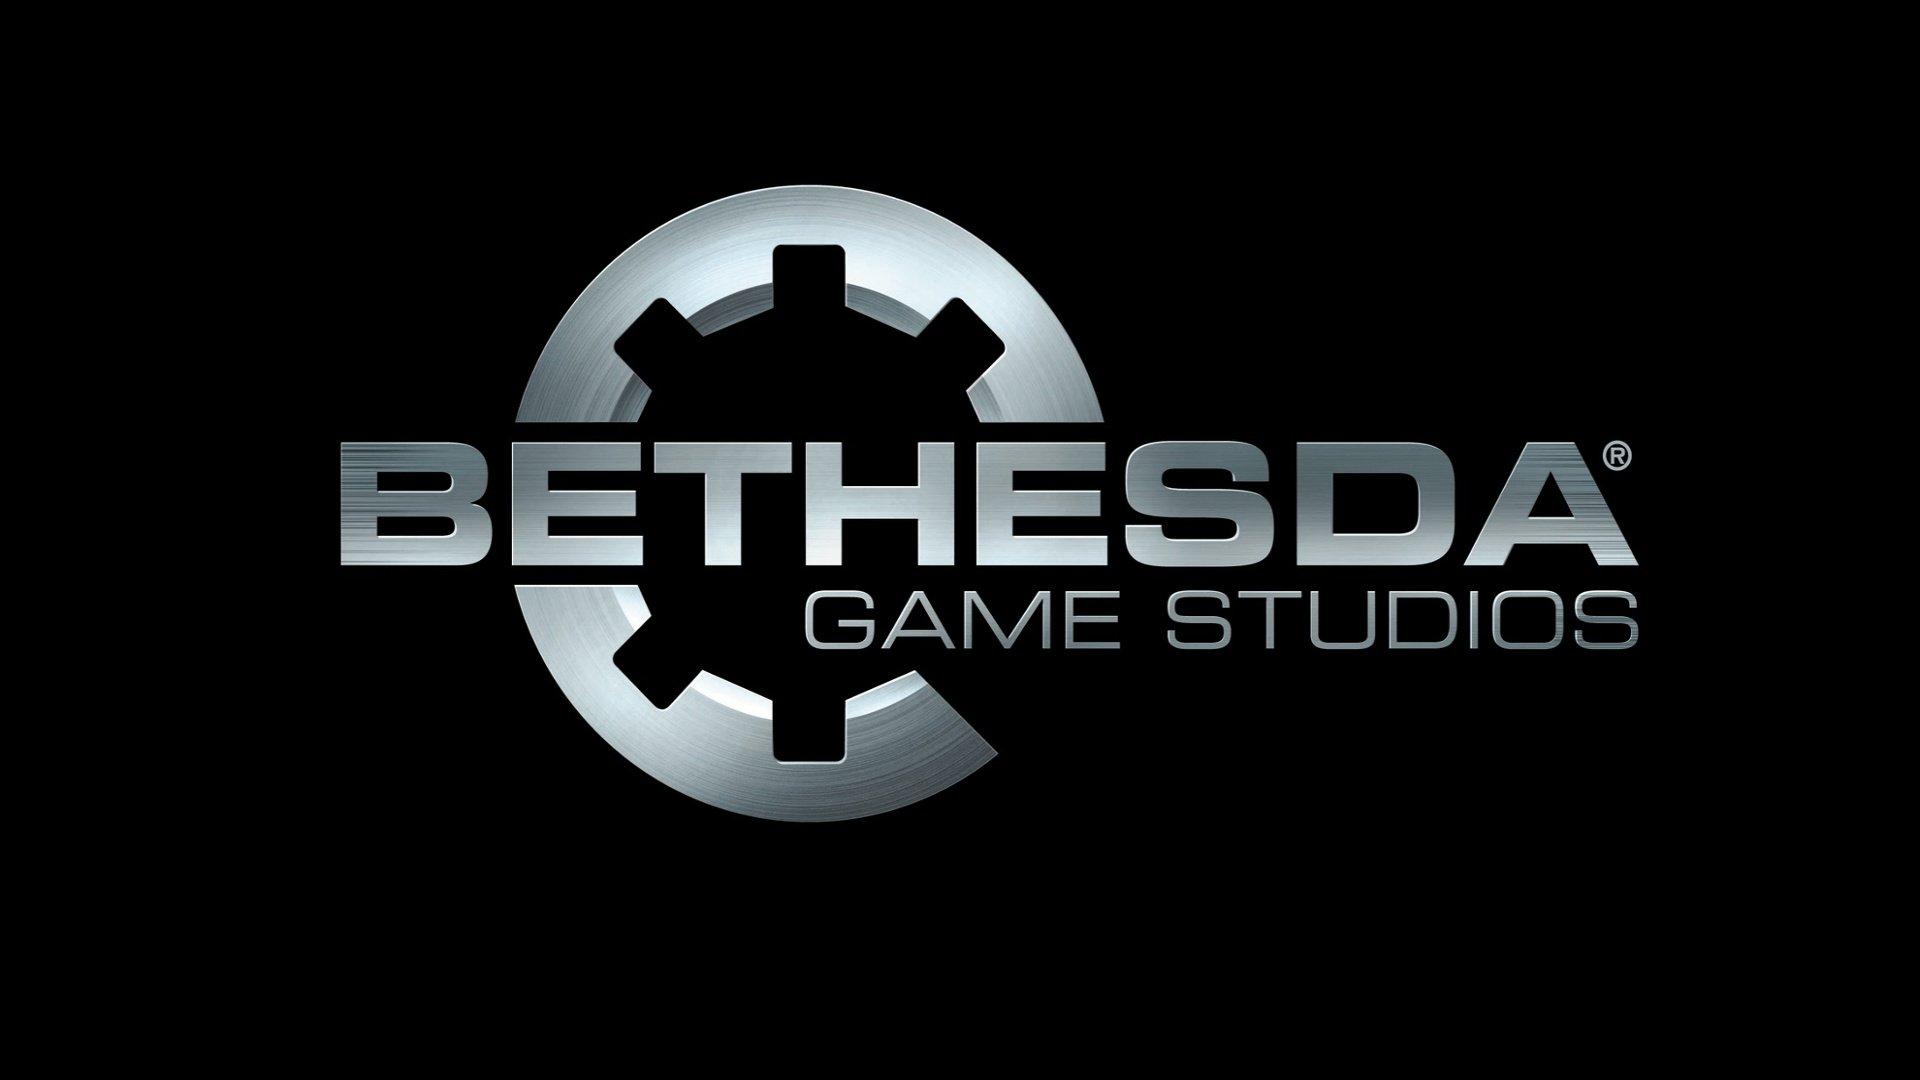 What Time Is Bethesda's E3 2018 Press Conference?